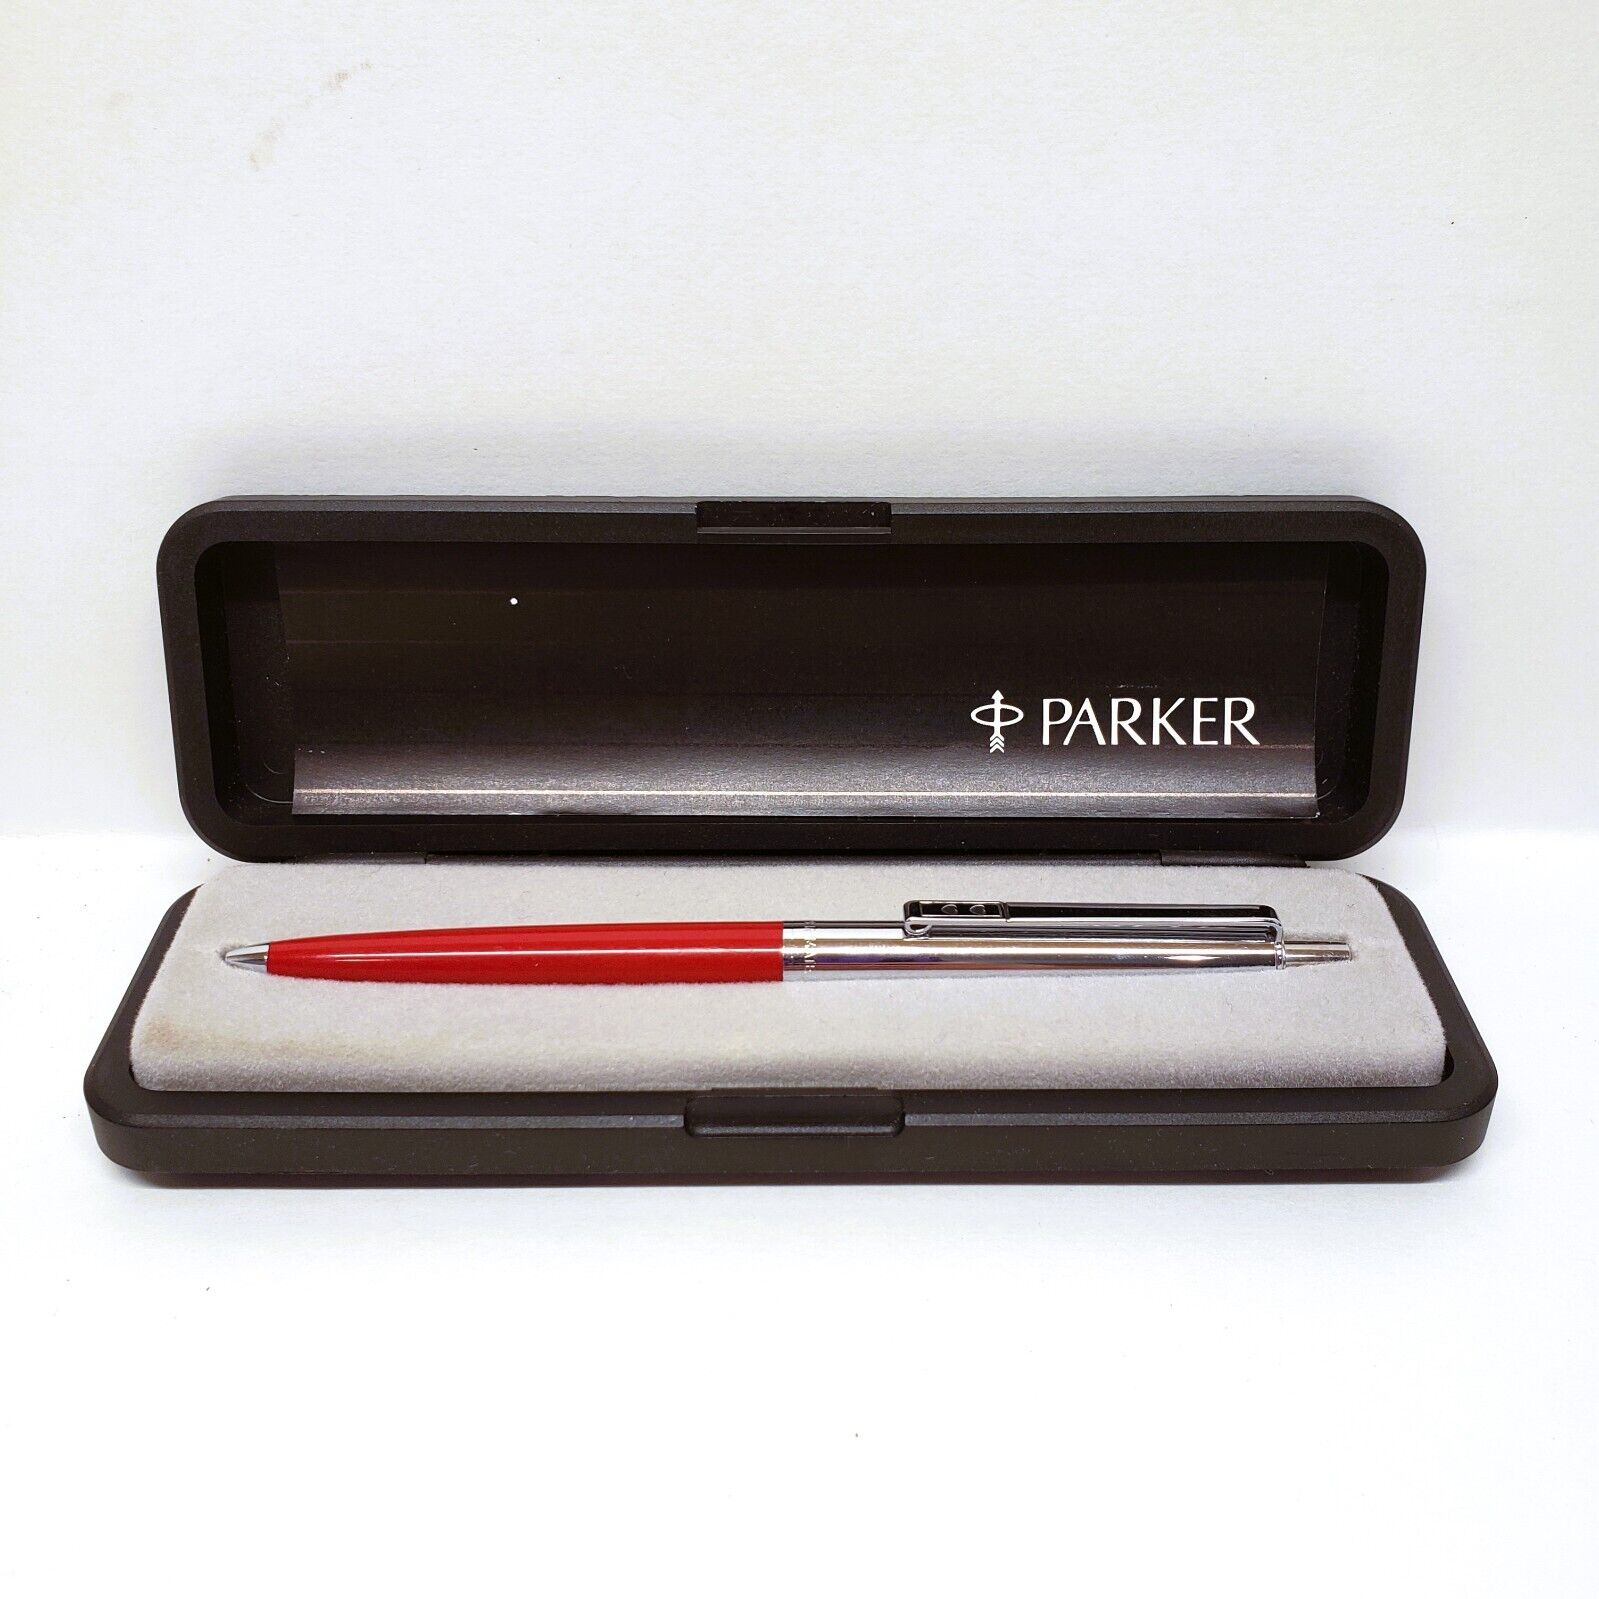 Vintage Parker Papermate Pen Ballpoint Red Silver with Black Case Made in USA